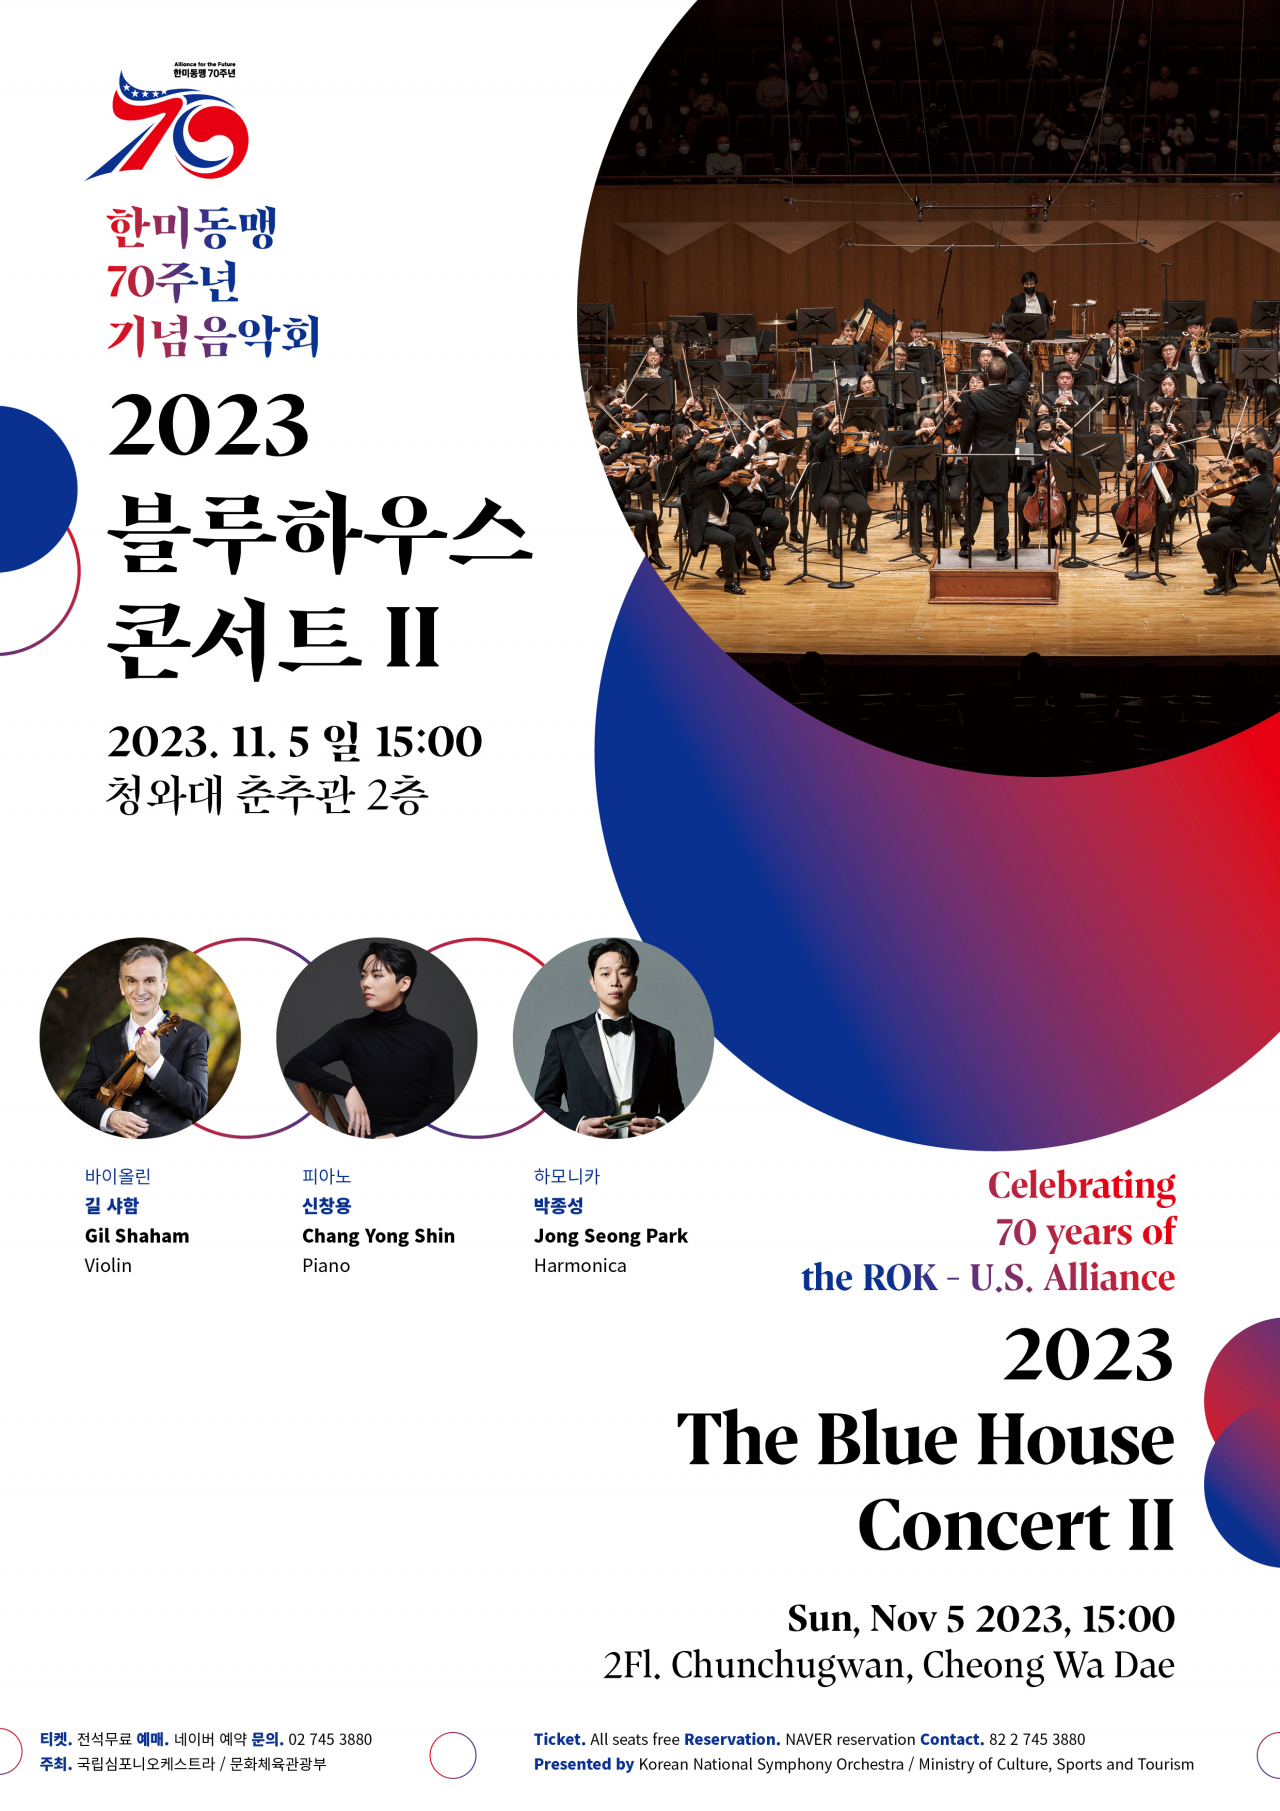 Second Blue House Concert to celebrate 70th anniversary of S